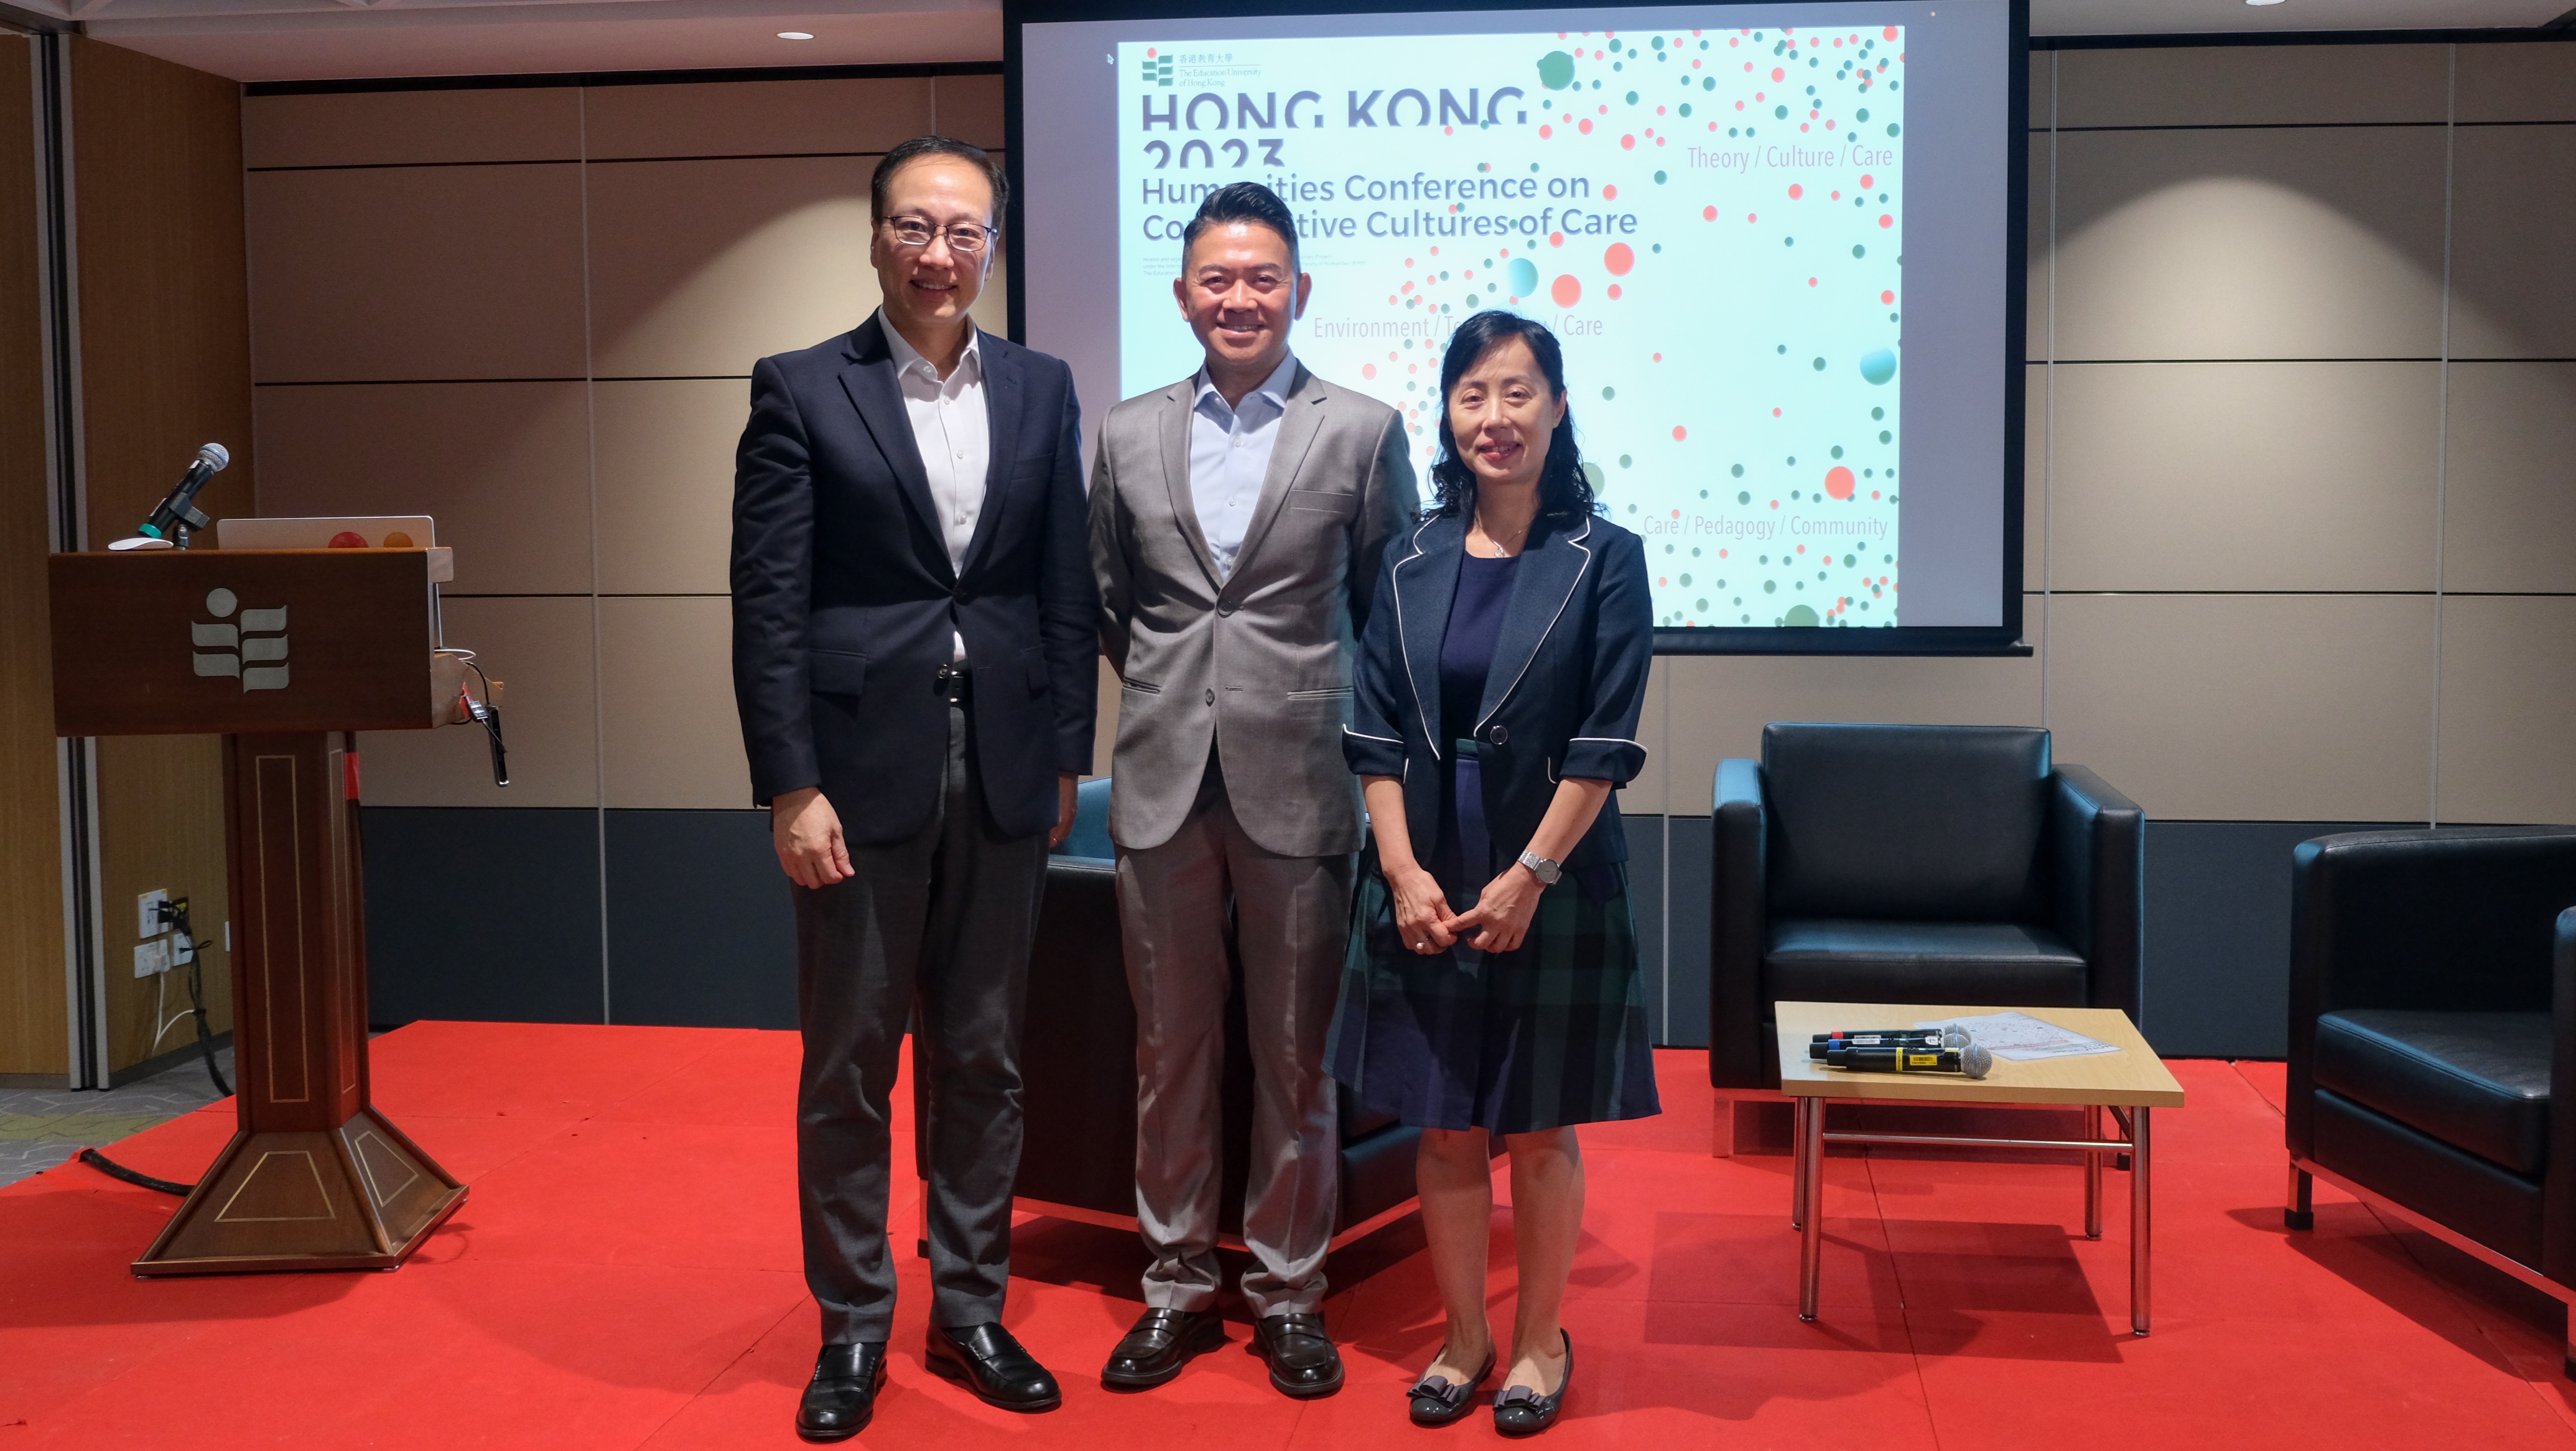 Prof Chetwyn Chan Che-hin (left), Prof John Erni (middle), and Prof May Cheng (right) delivered their welcoming speeches for the conference